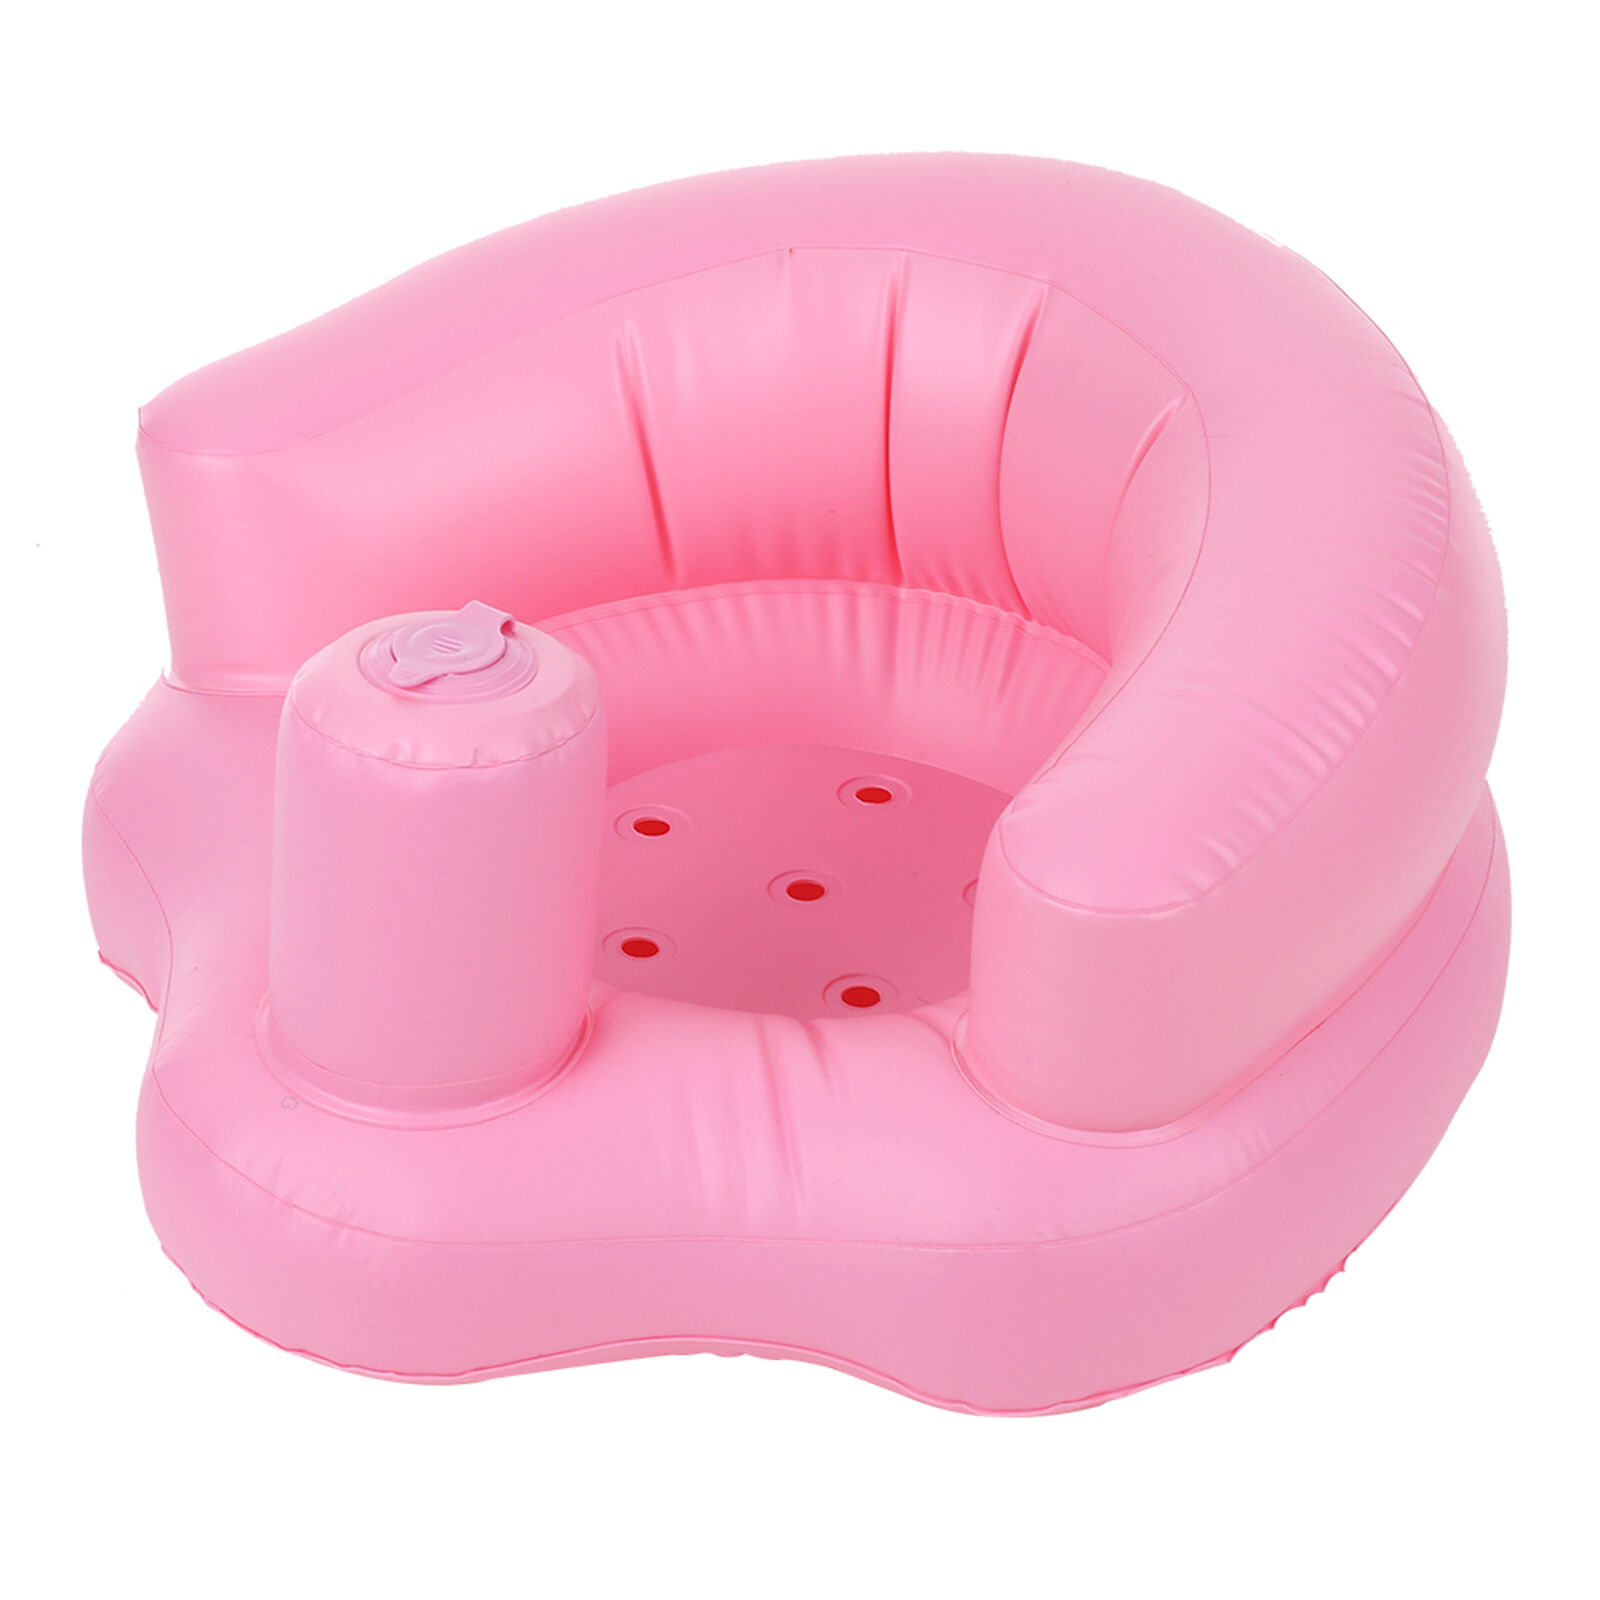 Inflatable Baby Chair Portable Kids Sofa Safety Training  Pushchair For L9e8